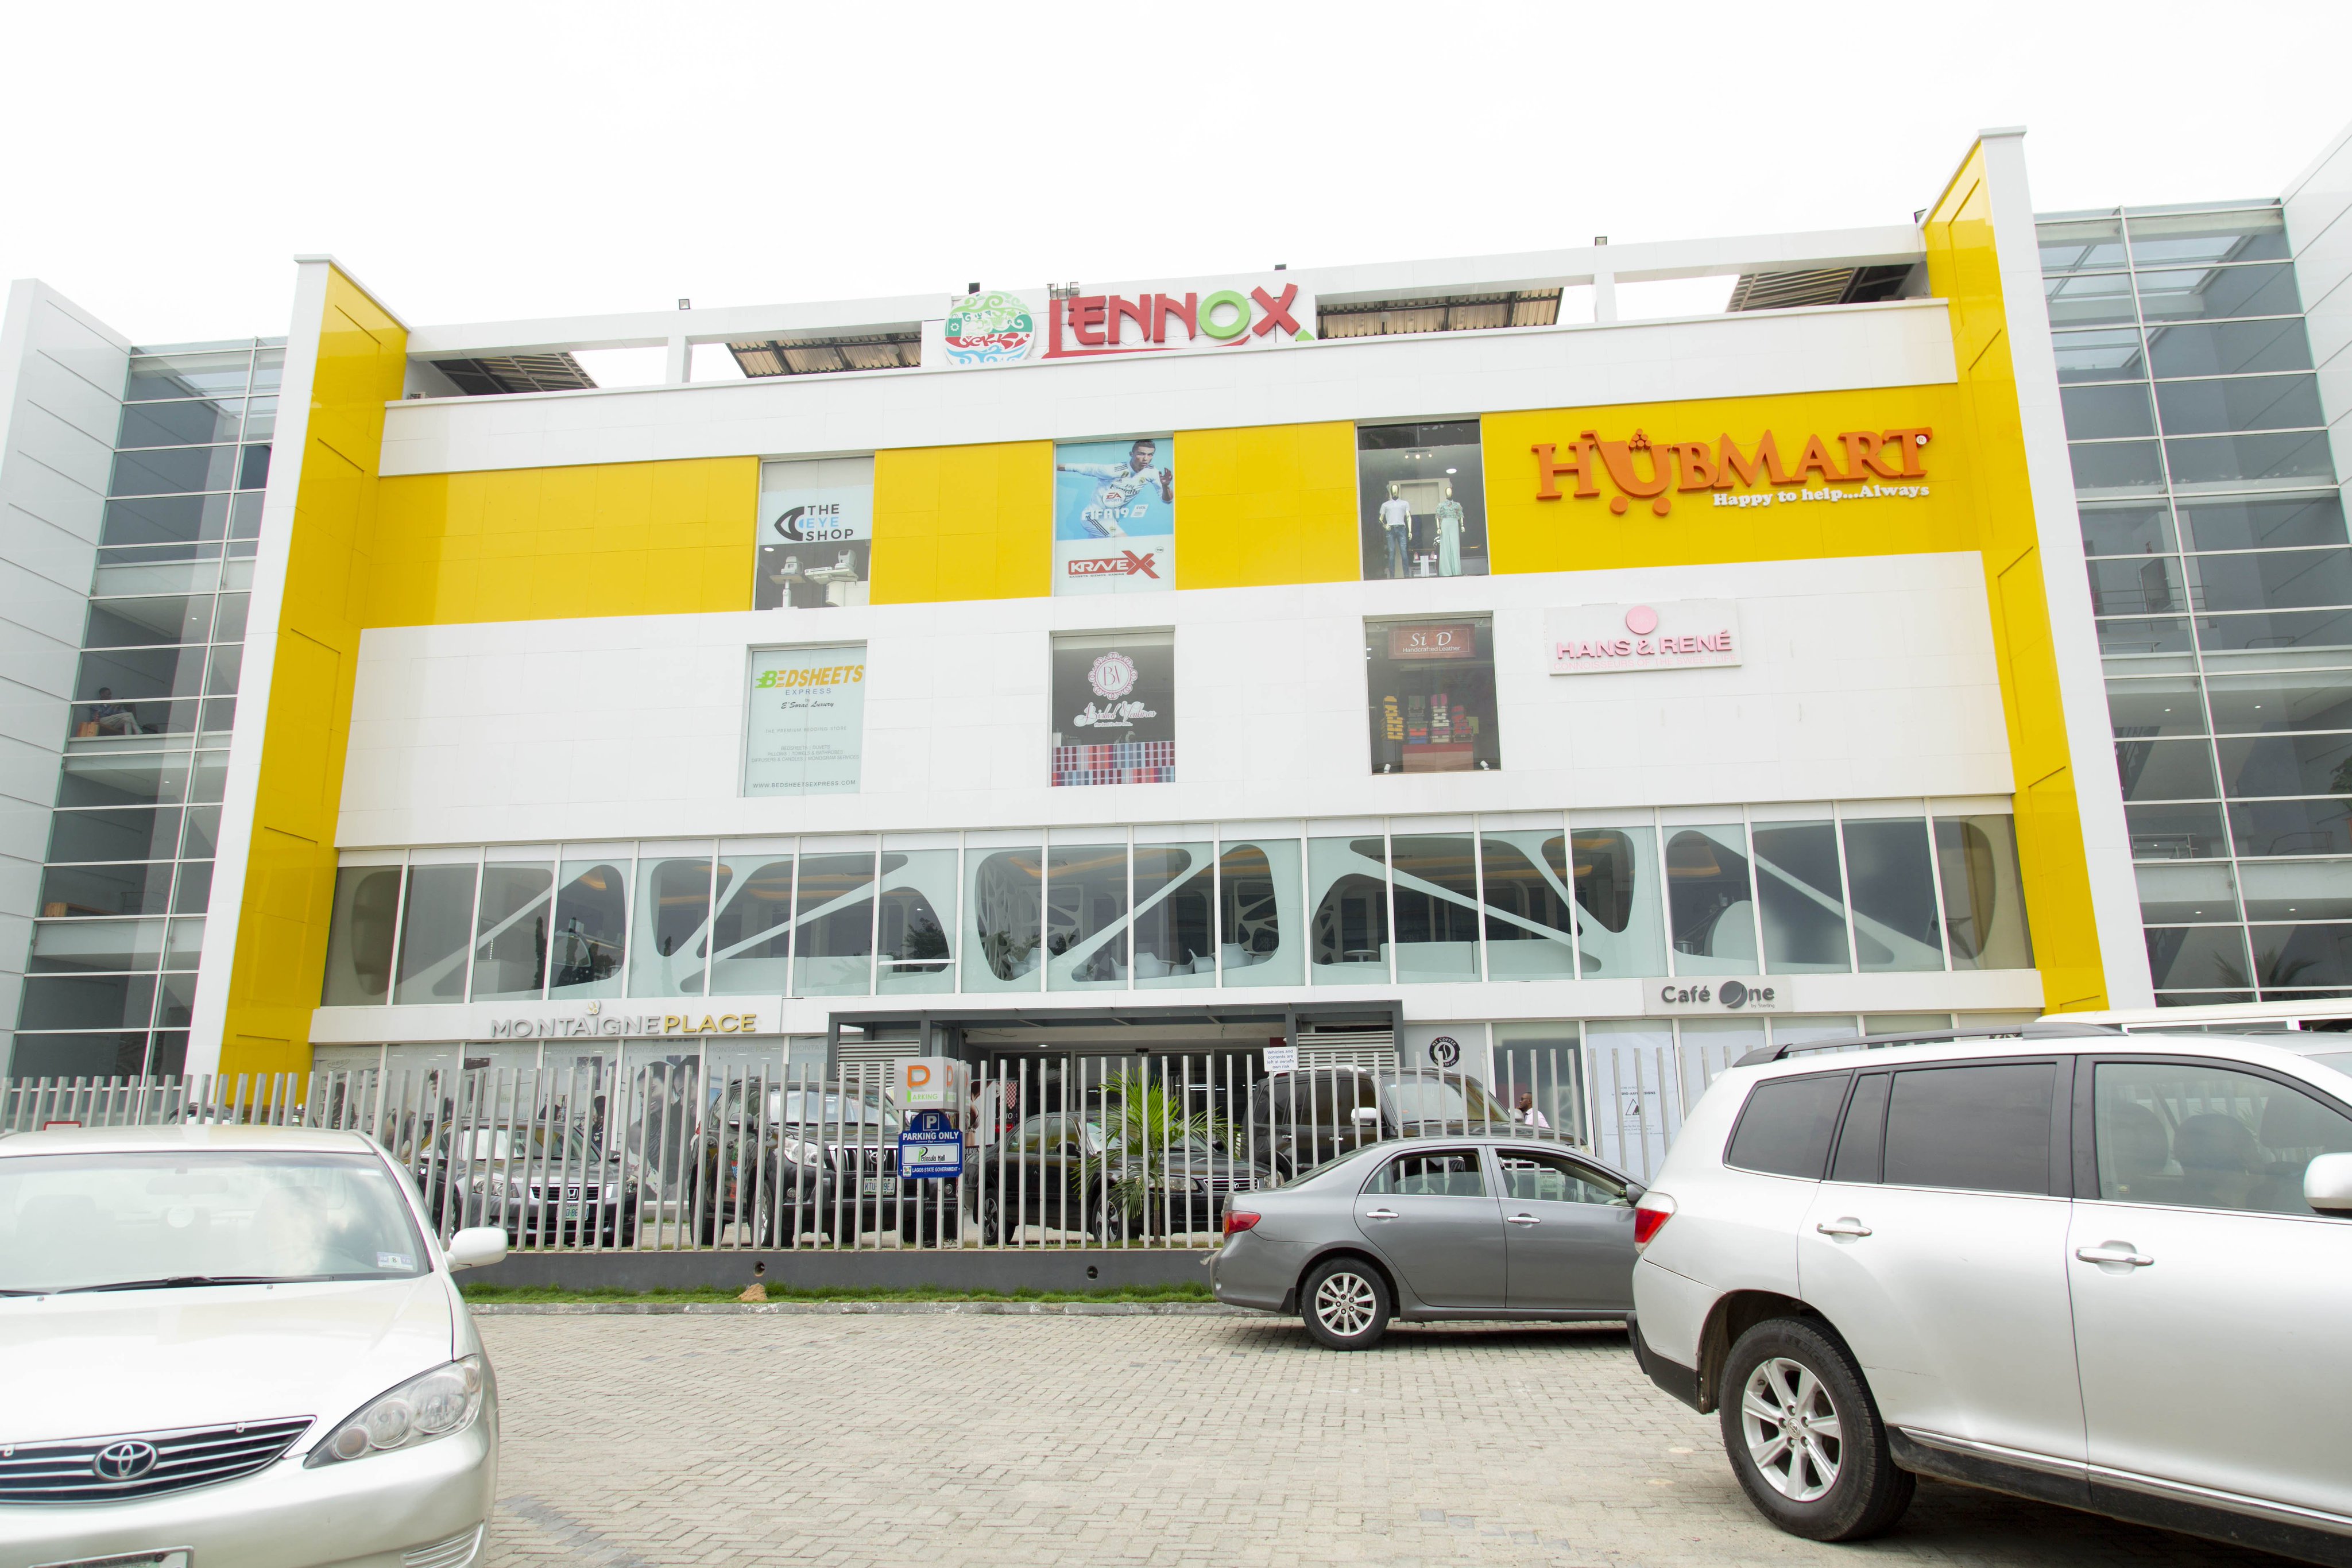 Hubmart on X: Can you spot our sign? Yes, are at Lennox Mall. Block A10  plot 2&3 Admiralty way,Lekki Phase1(Lennox Mall) #Hubmart  #lifeathubmart #HubmartVI#HubmartLekki #HubmartIkeja #HubmartOmole   / X